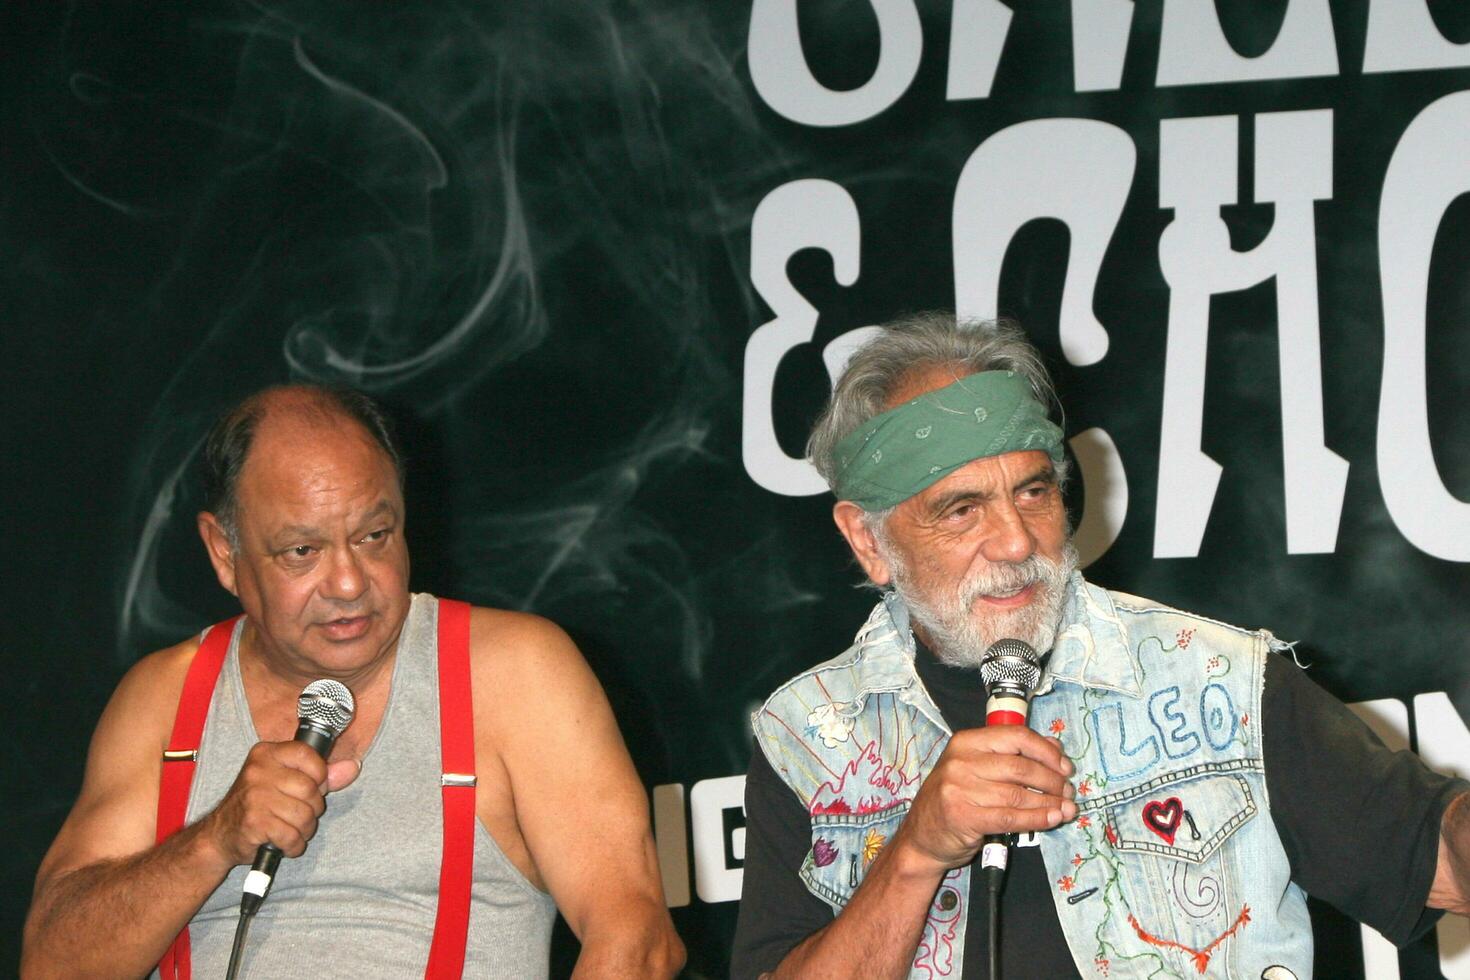 cheech marin Tommy chong cheech chong presse conférence dans Ouest Hollywood Californie sur juillet 30 2008 2008 kathy huches huches photo